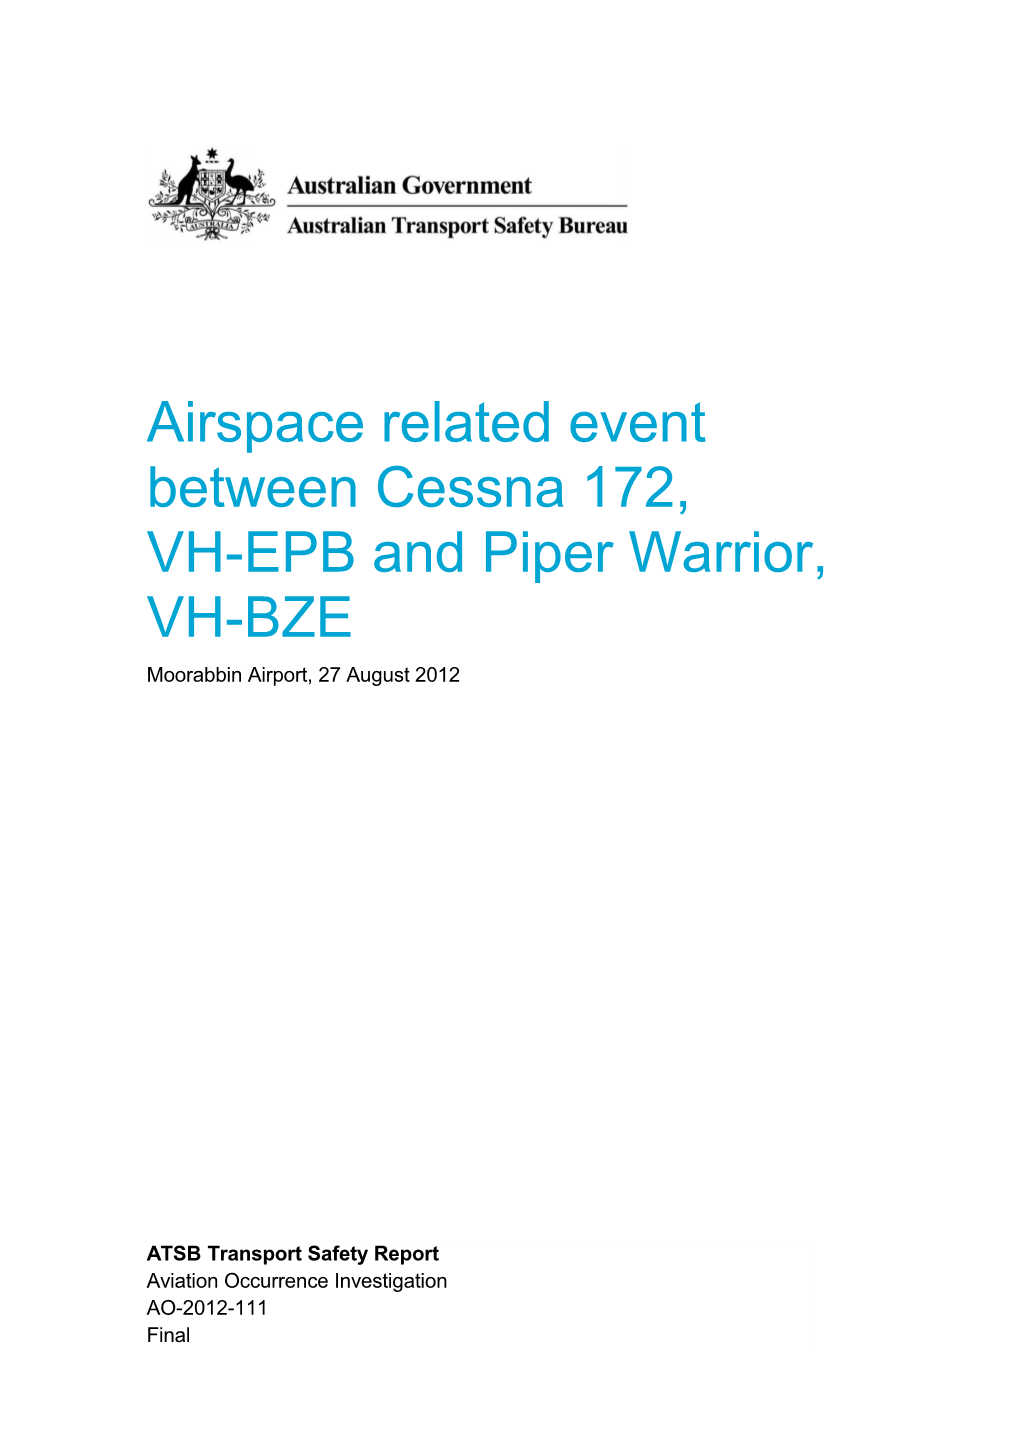 Airspace Related Event Between Cessna 172, VHEPB and Piper Warrior, VHBZE